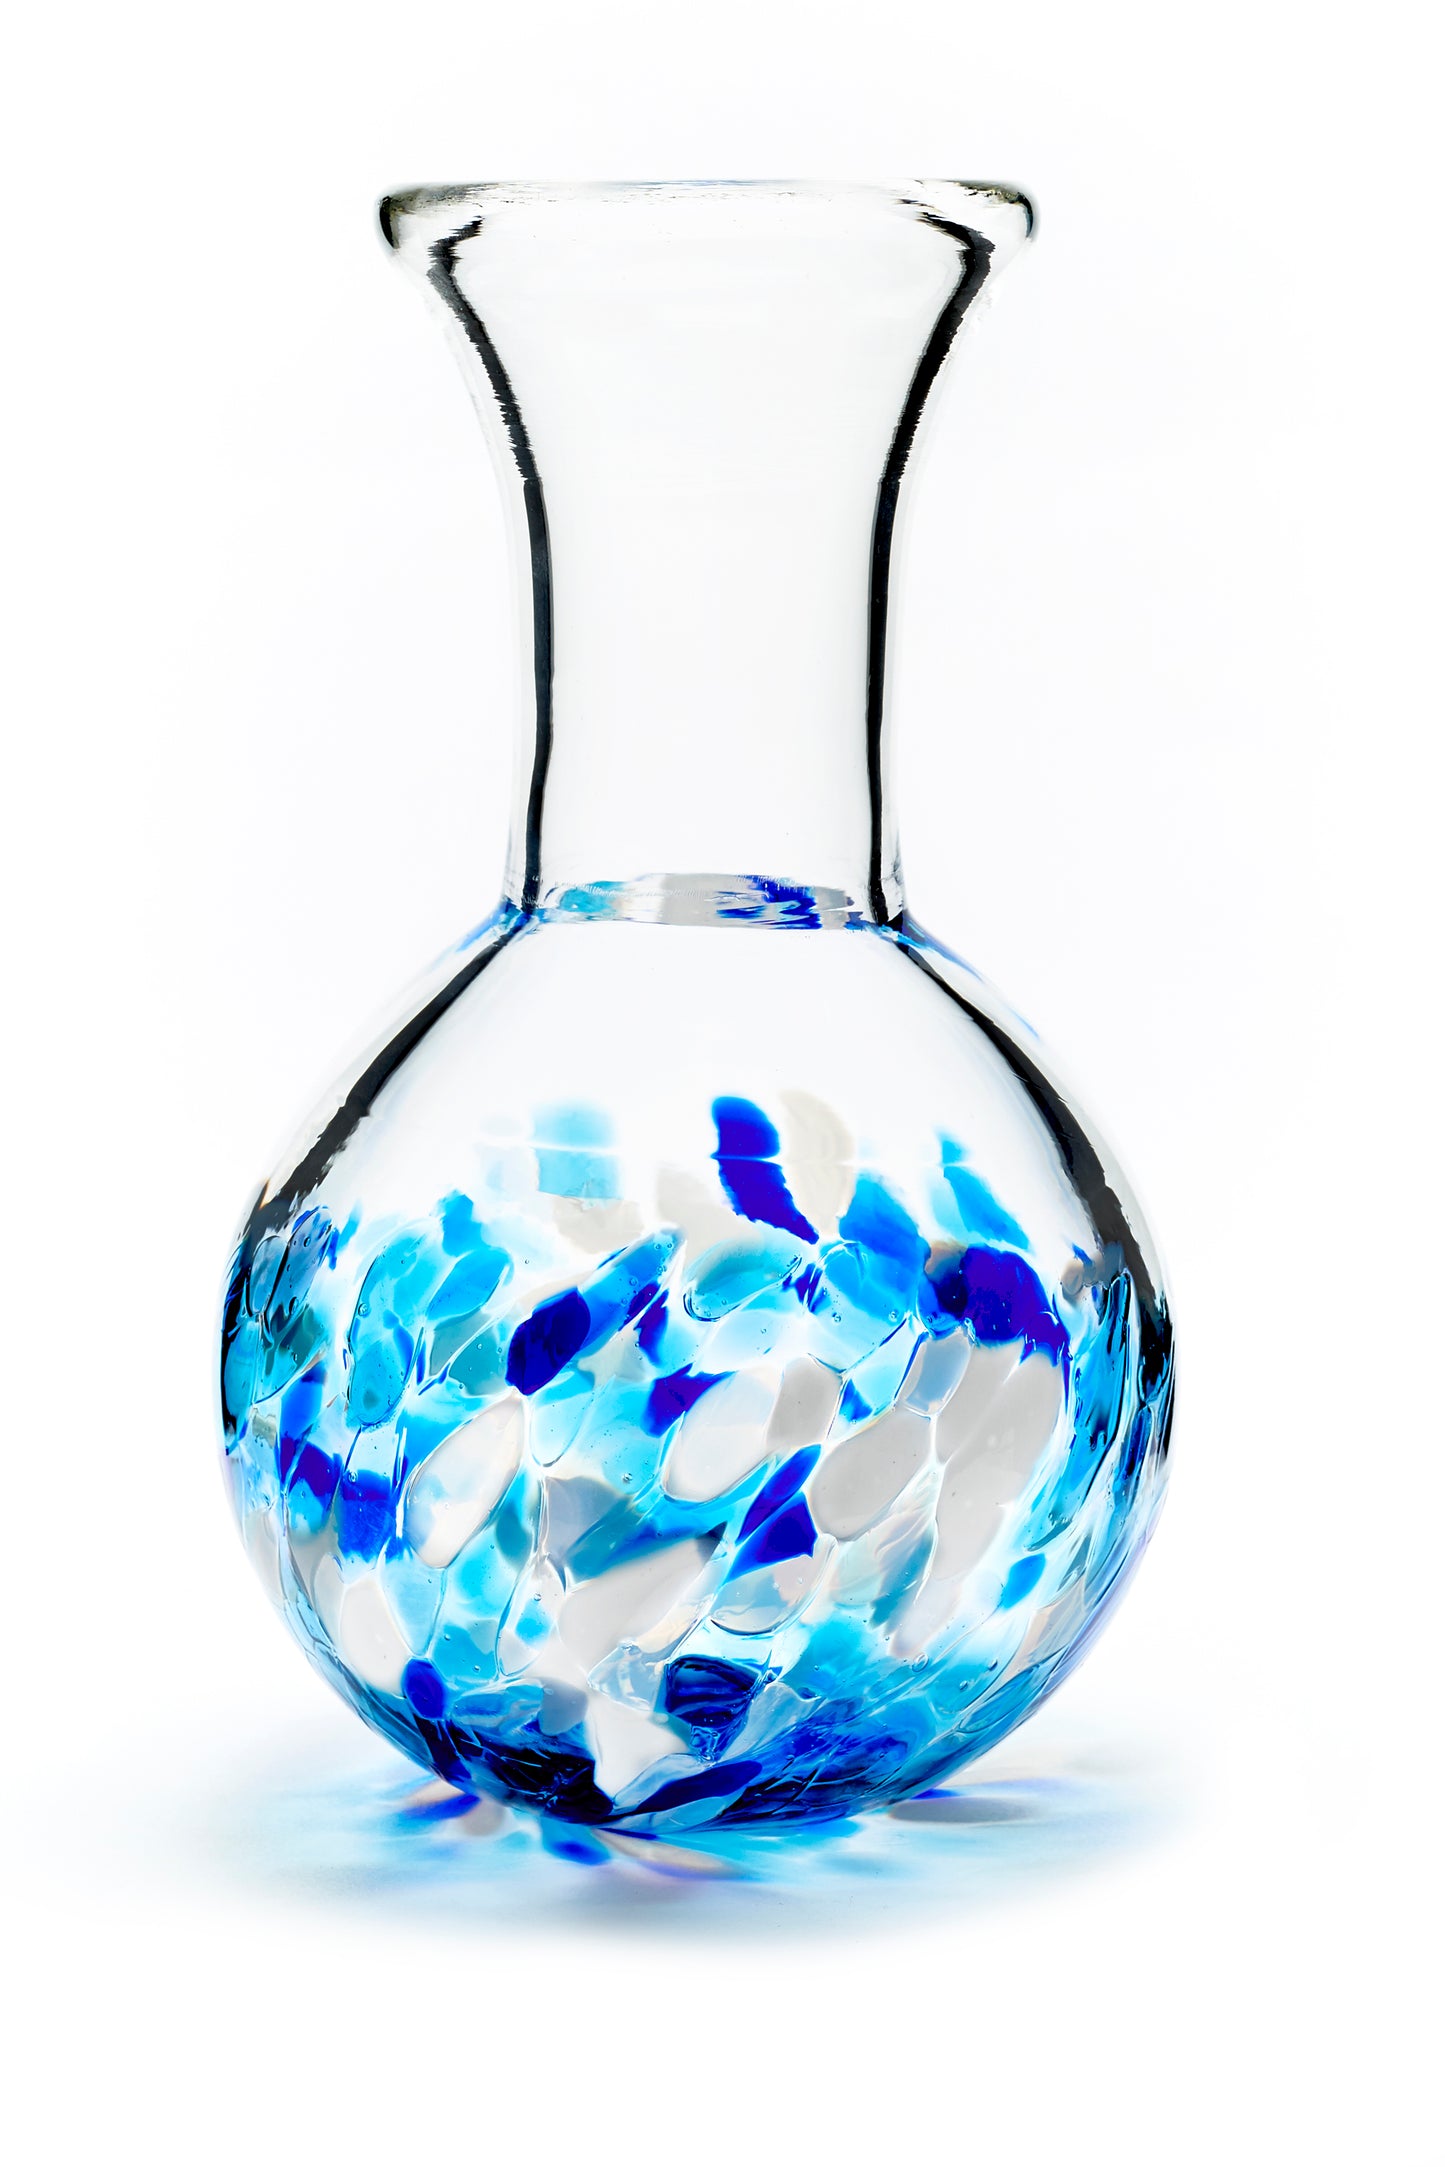 Hand blown glass vase. Cobalt blue, teal blue, and white glass on the bottom. Colour combination is called "Winter."